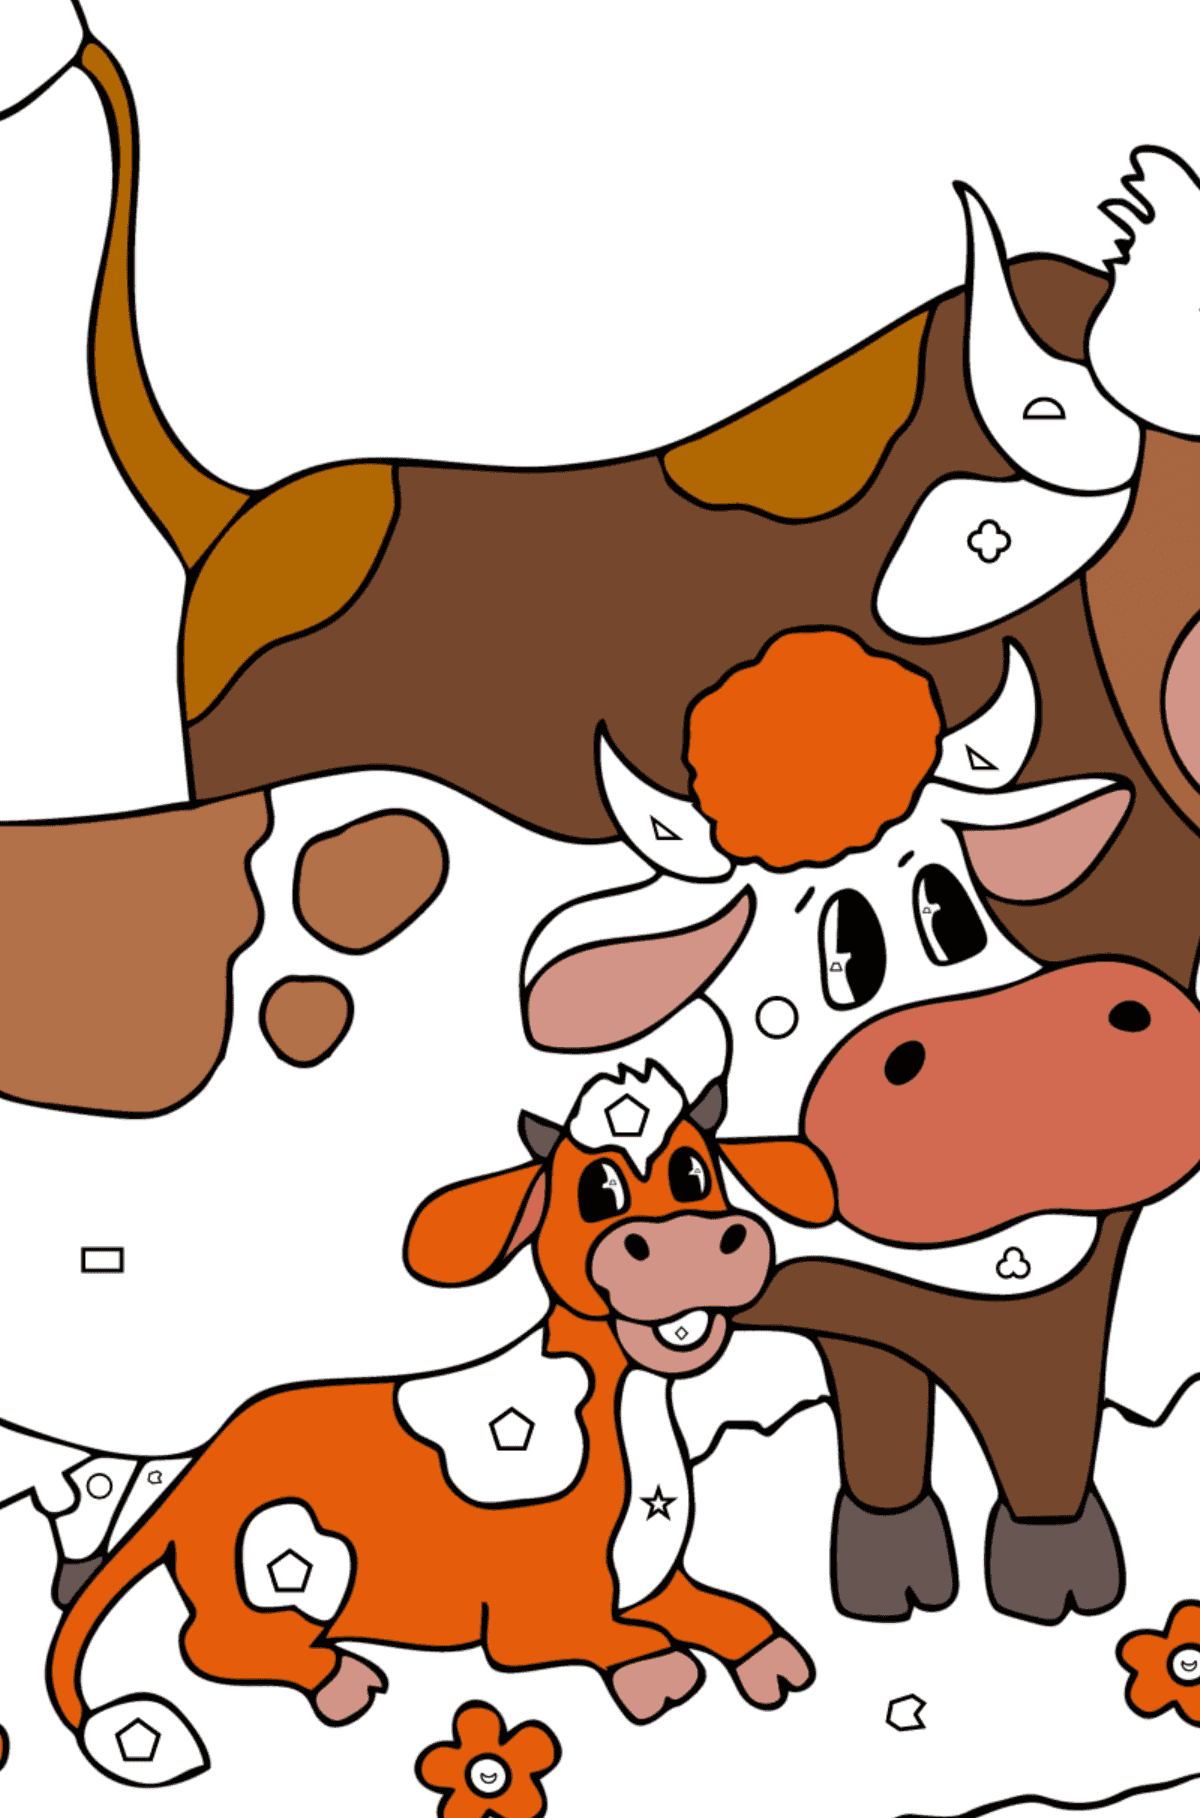 Cow, bull and calf coloring page - Coloring by Geometric Shapes for Kids